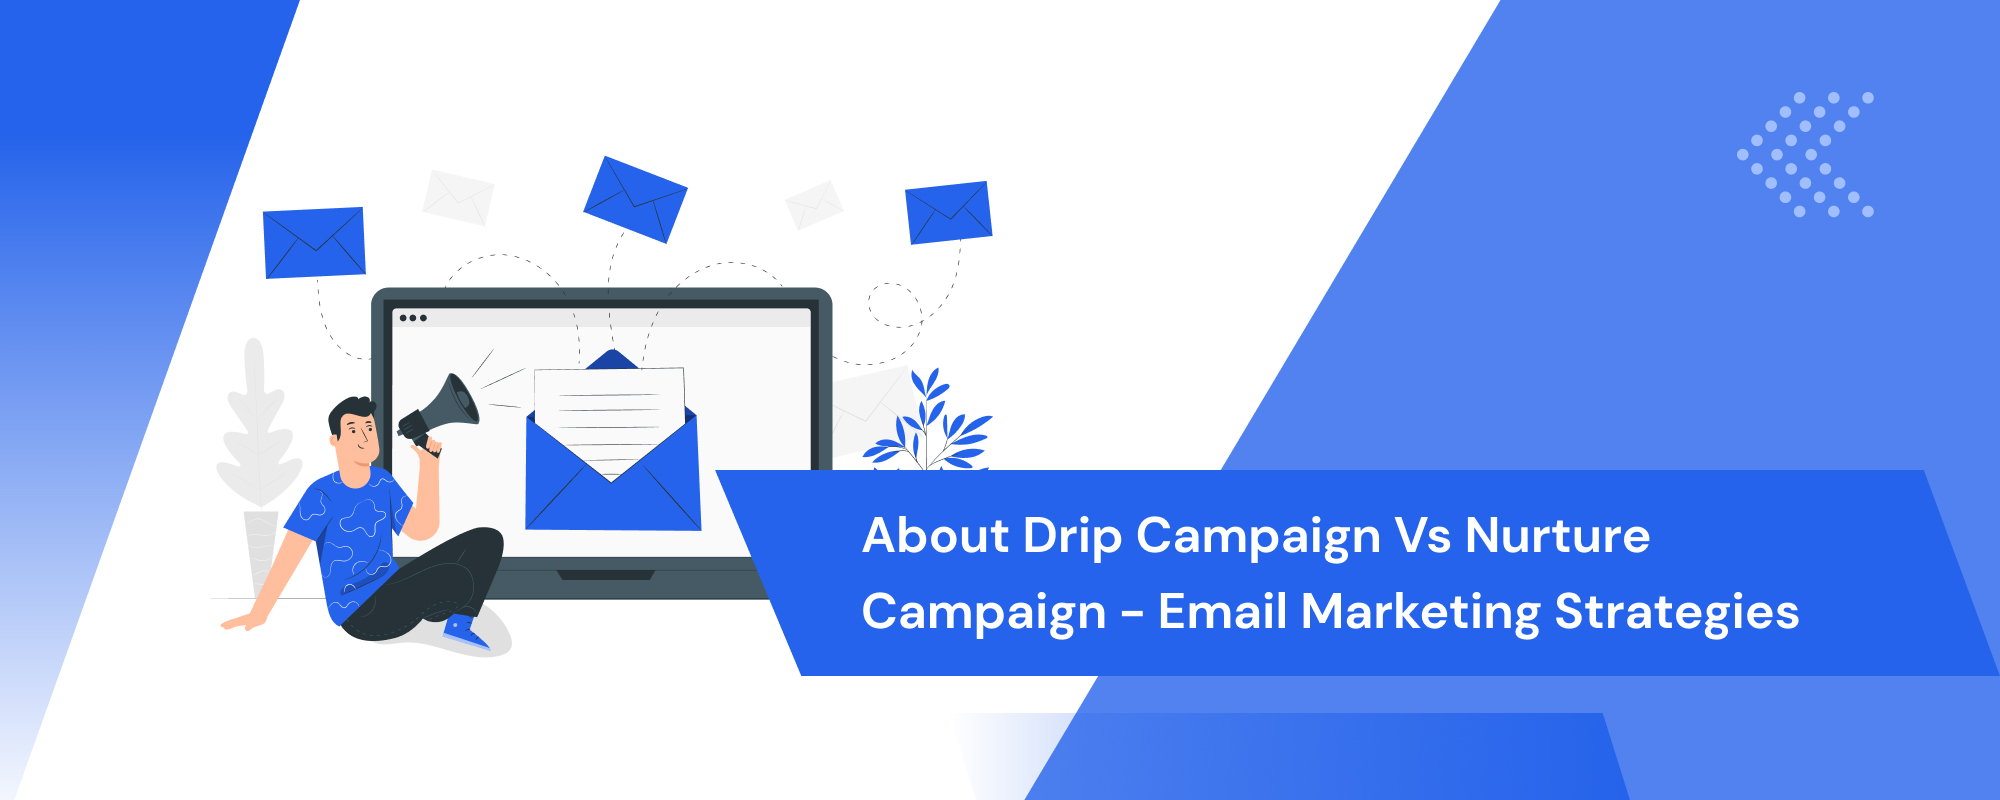 About Drip Campaign vs Nurture Campaign - Email Marketing Strategies